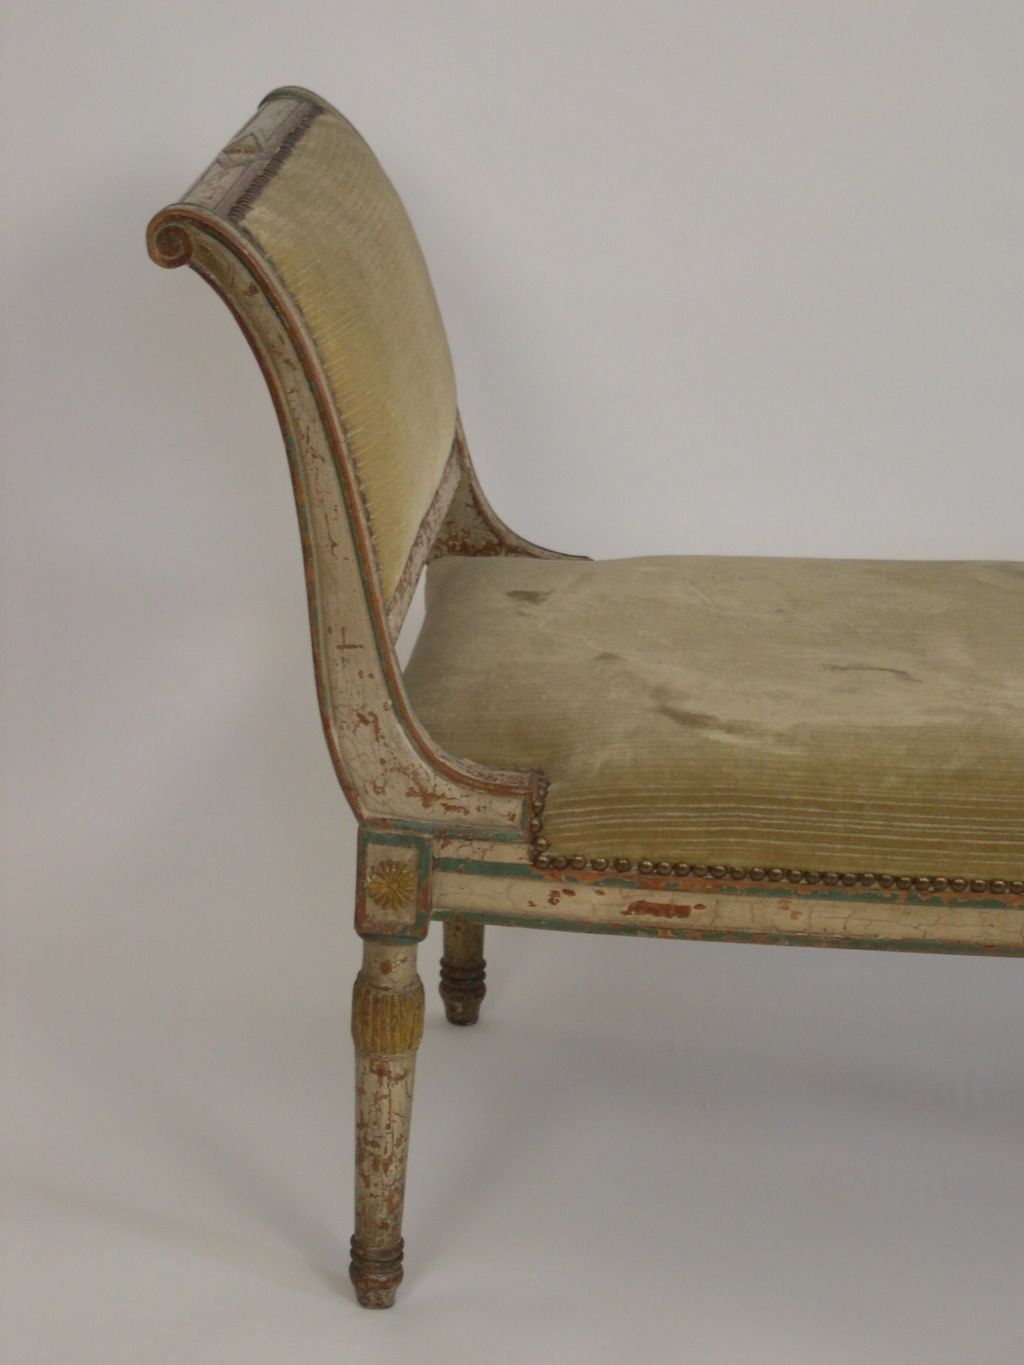 Directoire period diminutive recamier in walnut or beech, with carved neoclassical decoration, retaining its original painted blue, cream and yellow decoration.